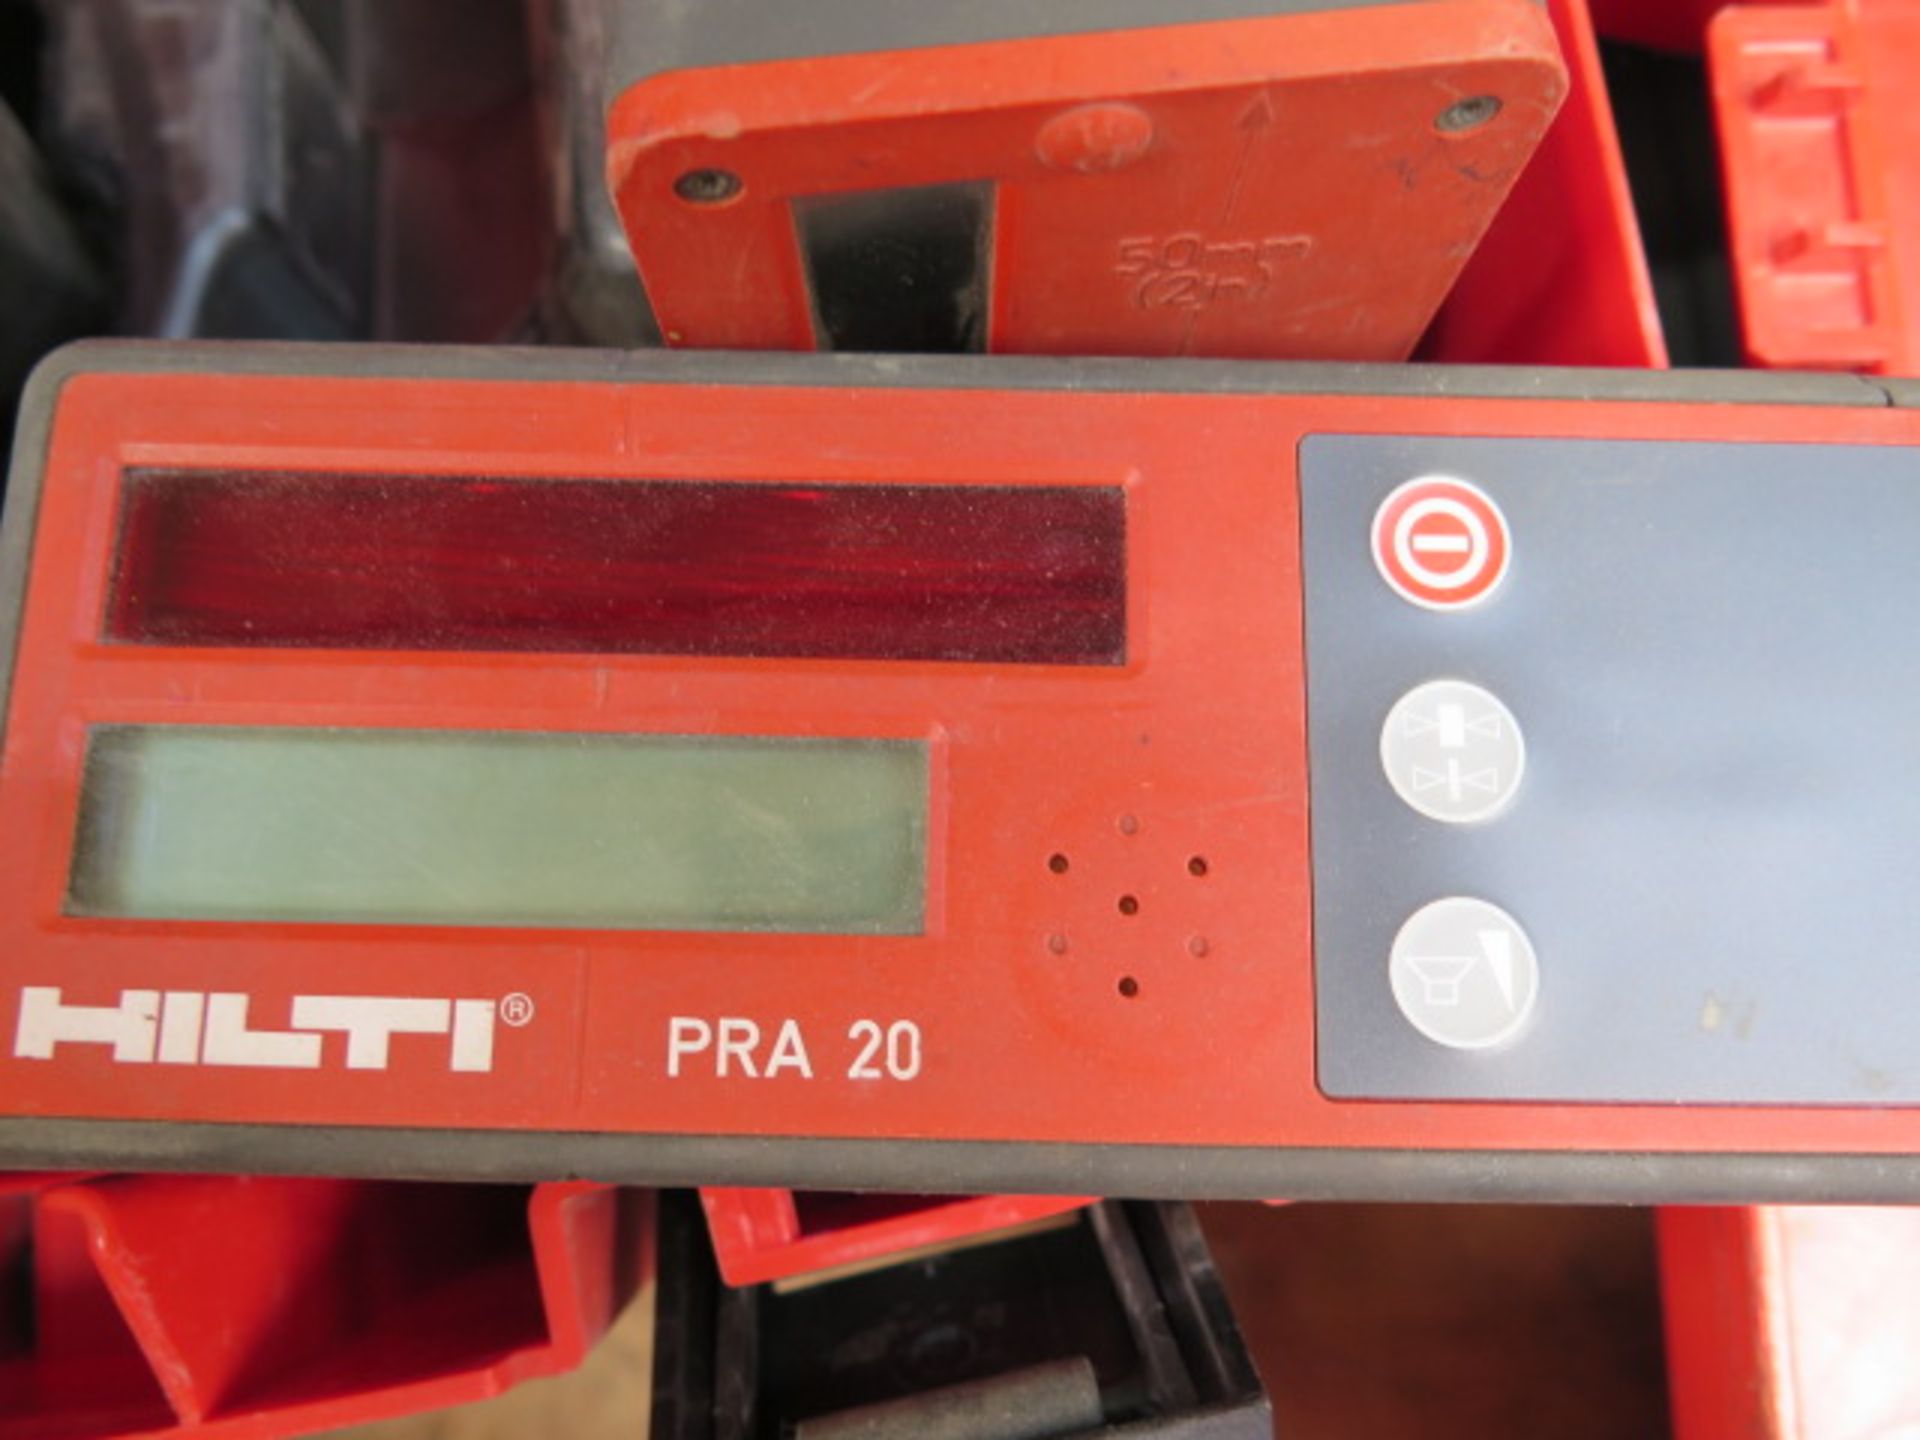 Hilti PR 20 Rotating Laser (SOLD AS-IS - NO WARRANTY) - Image 6 of 8